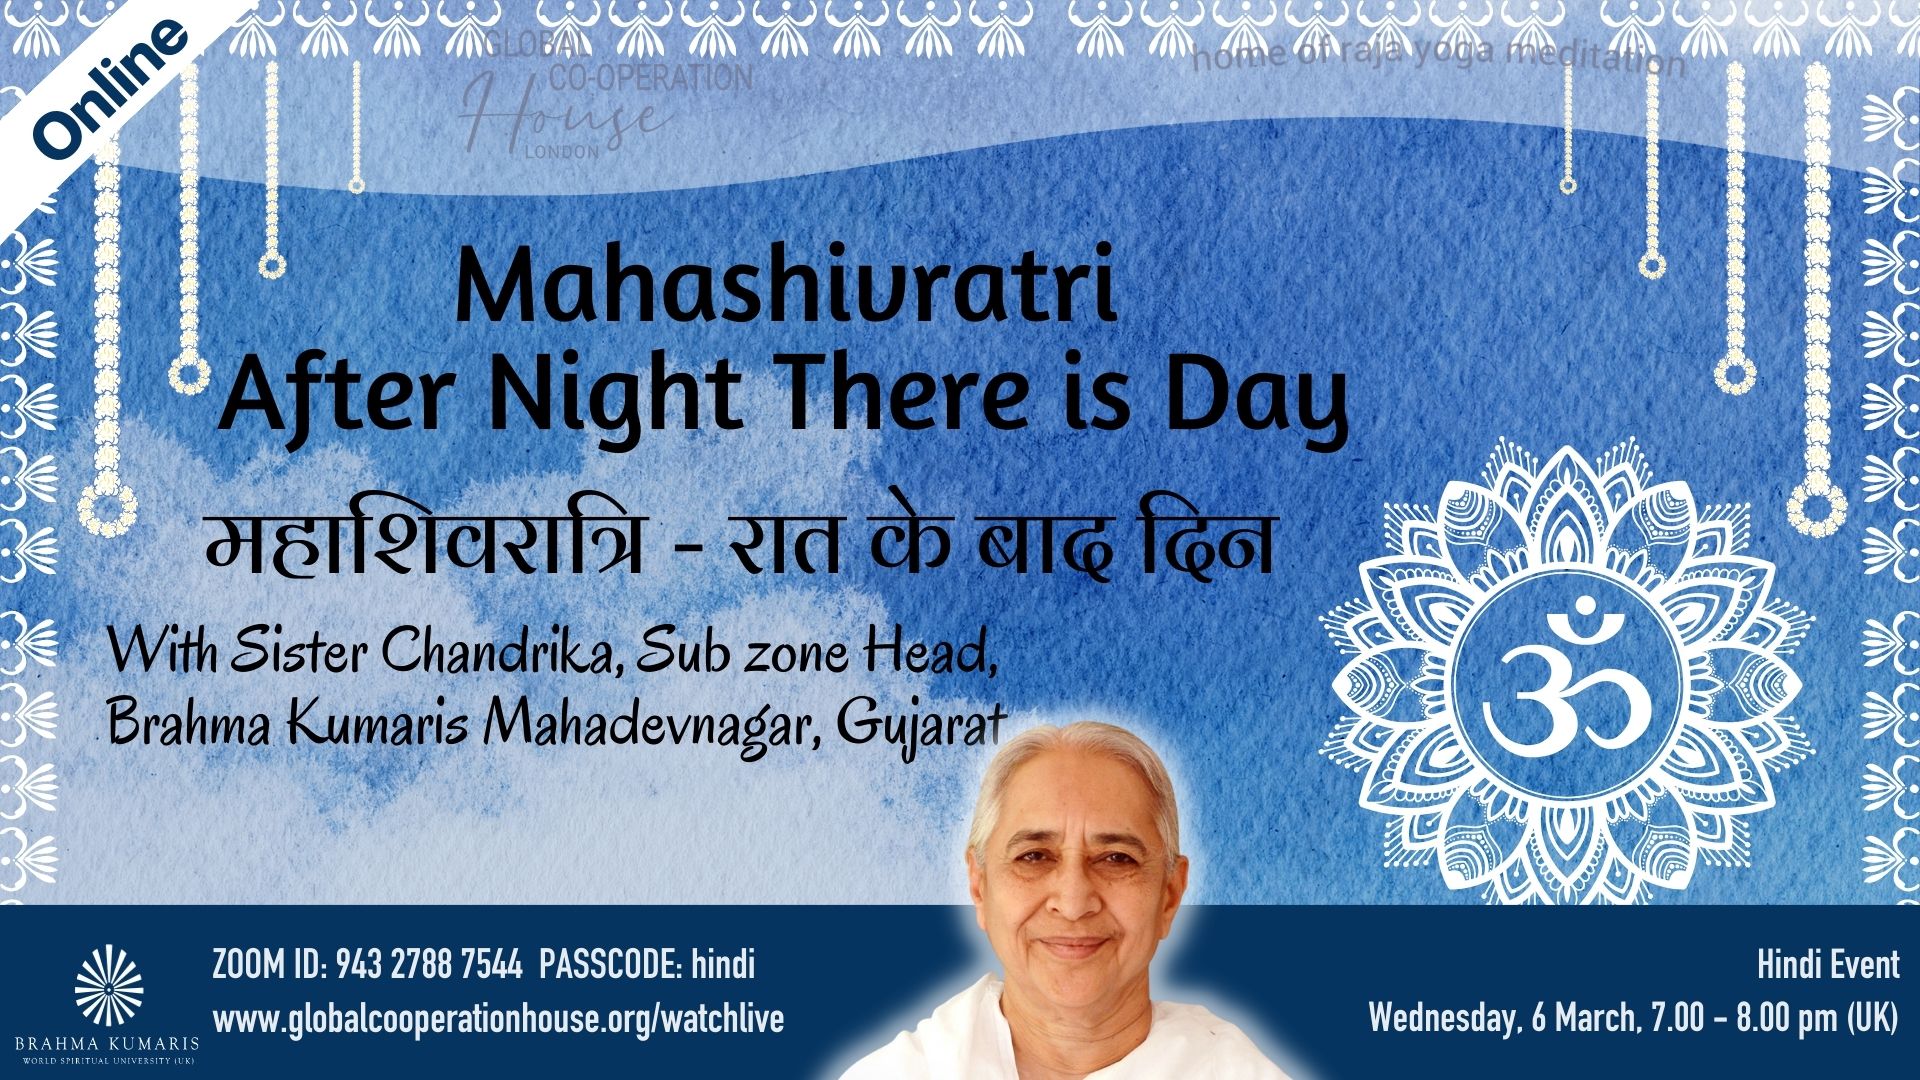 महाशिवरात्रि - रात के बाद दिन : Mahashivratri - After Night There is Day